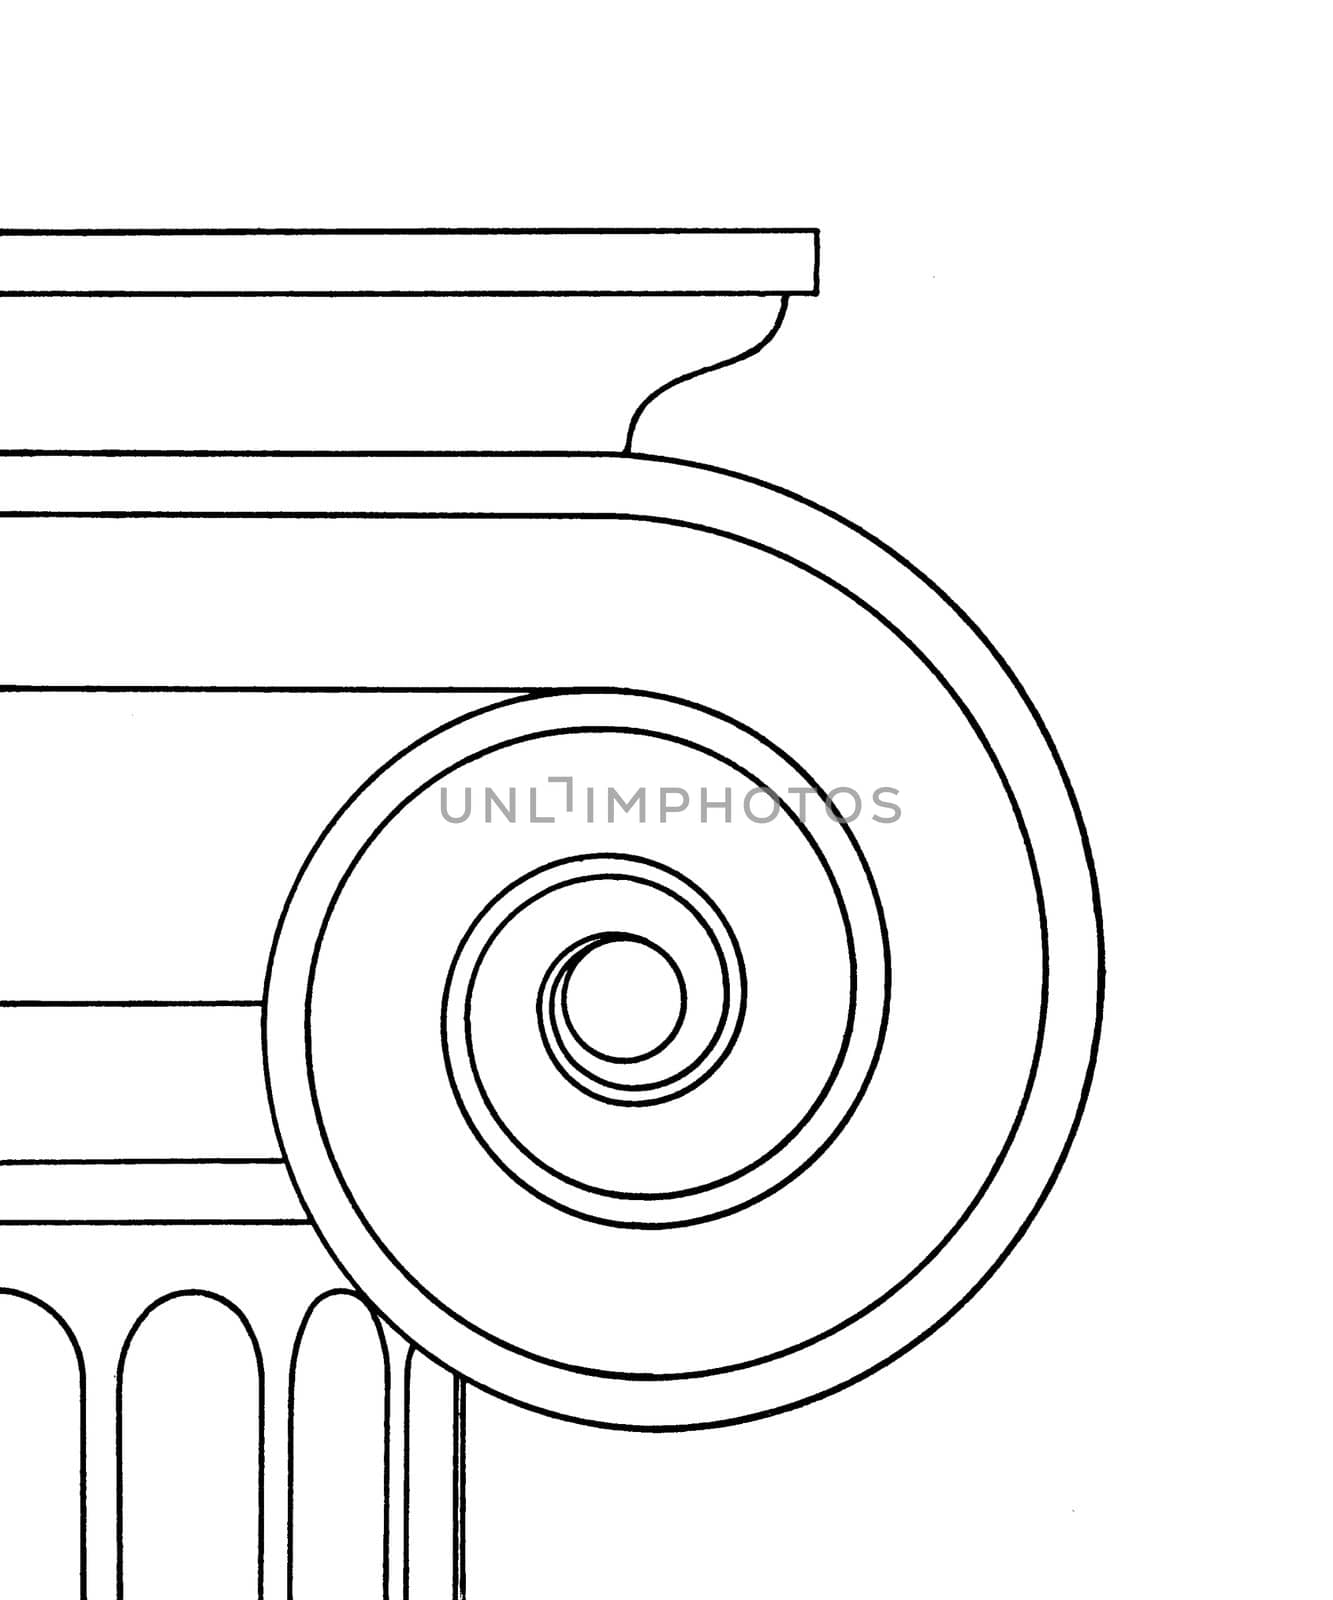 Line drawing of ionic capital